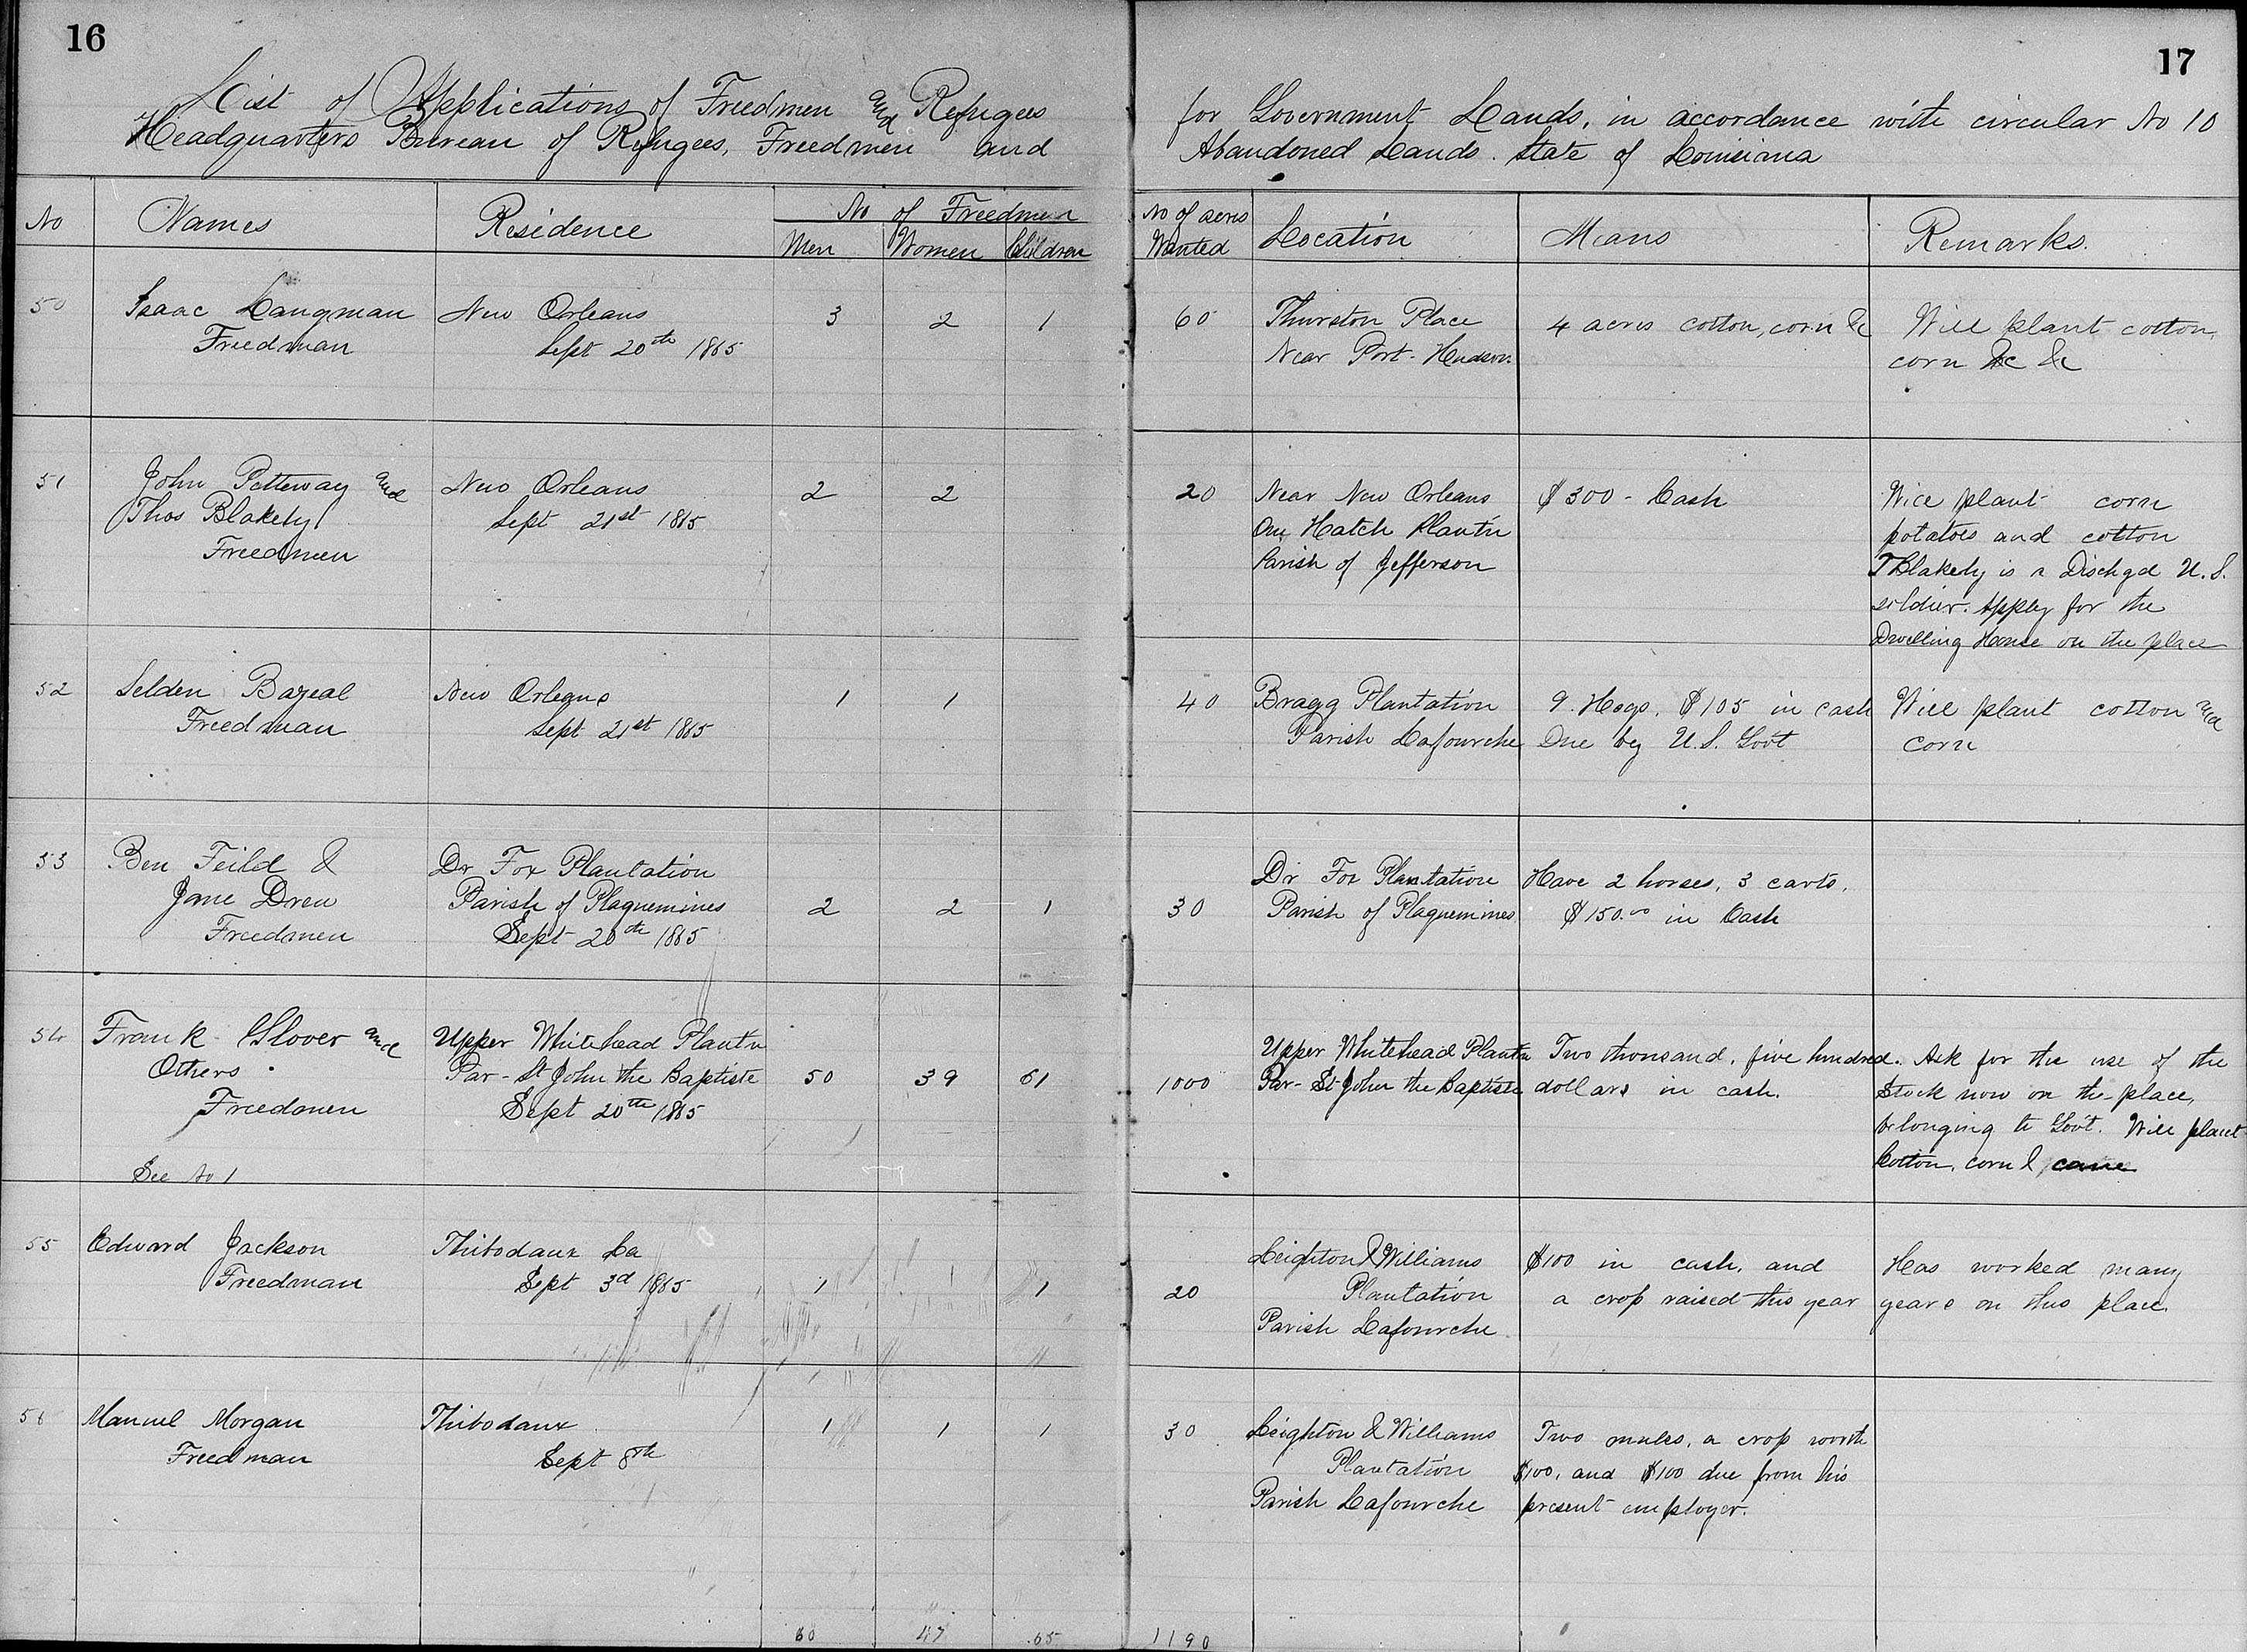 A ledge of people who applied for land with the Freedmen's Bureau.